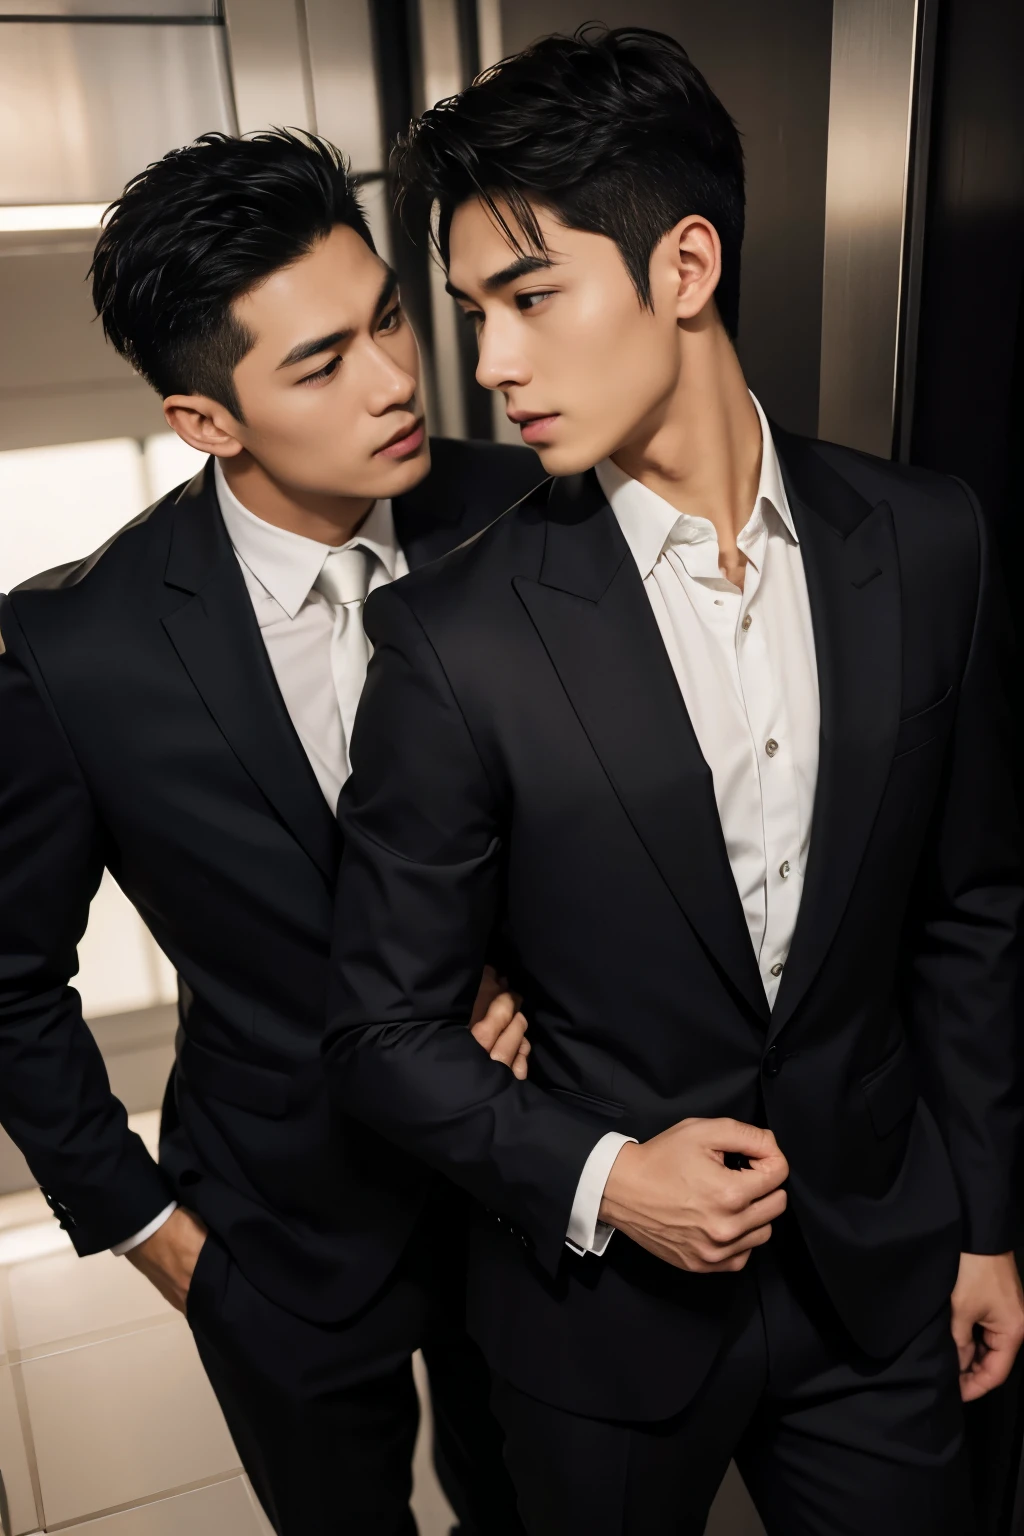 two men, two males, hyper realistic image of extremely handsome 30 year old filipino man, mature features, wearing a fancy suit, kissing a handsome 30 year old muscular filipino man wearing a fitted black suit, in an enclosed elevator, sex from behind, standing sex, perfect face, front view, full body, fill frame, zoomed out, highly detailed, intricate details, sharp focus